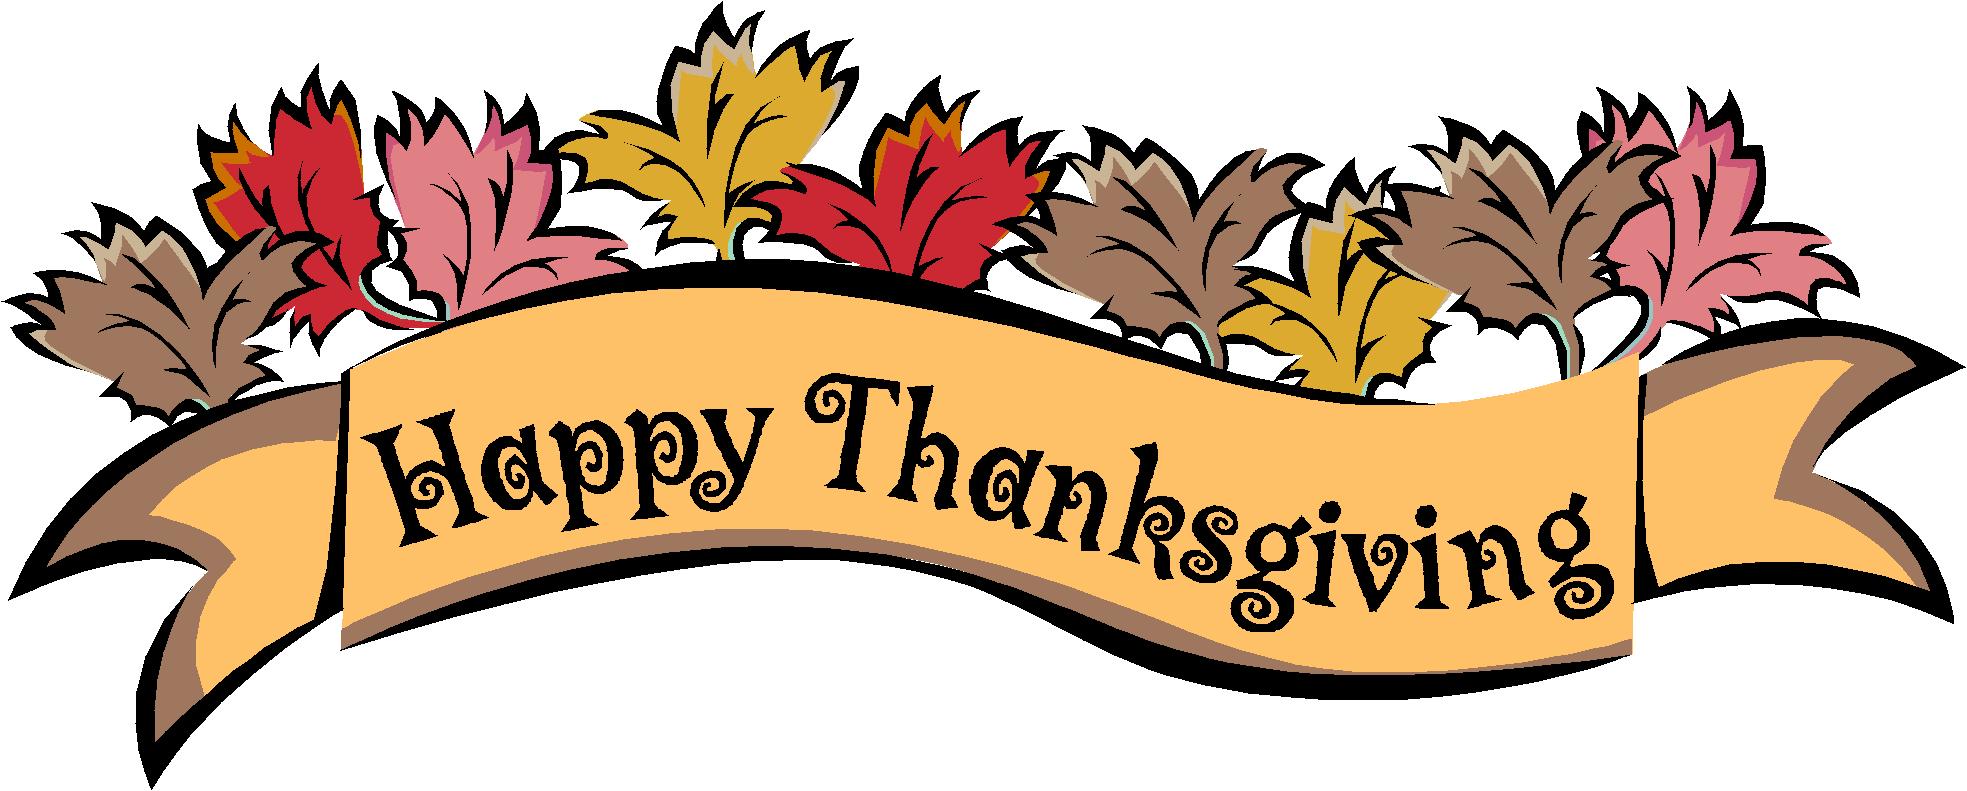 Free Download}* Happy Thanksgiving Images Wallpaper Pictures